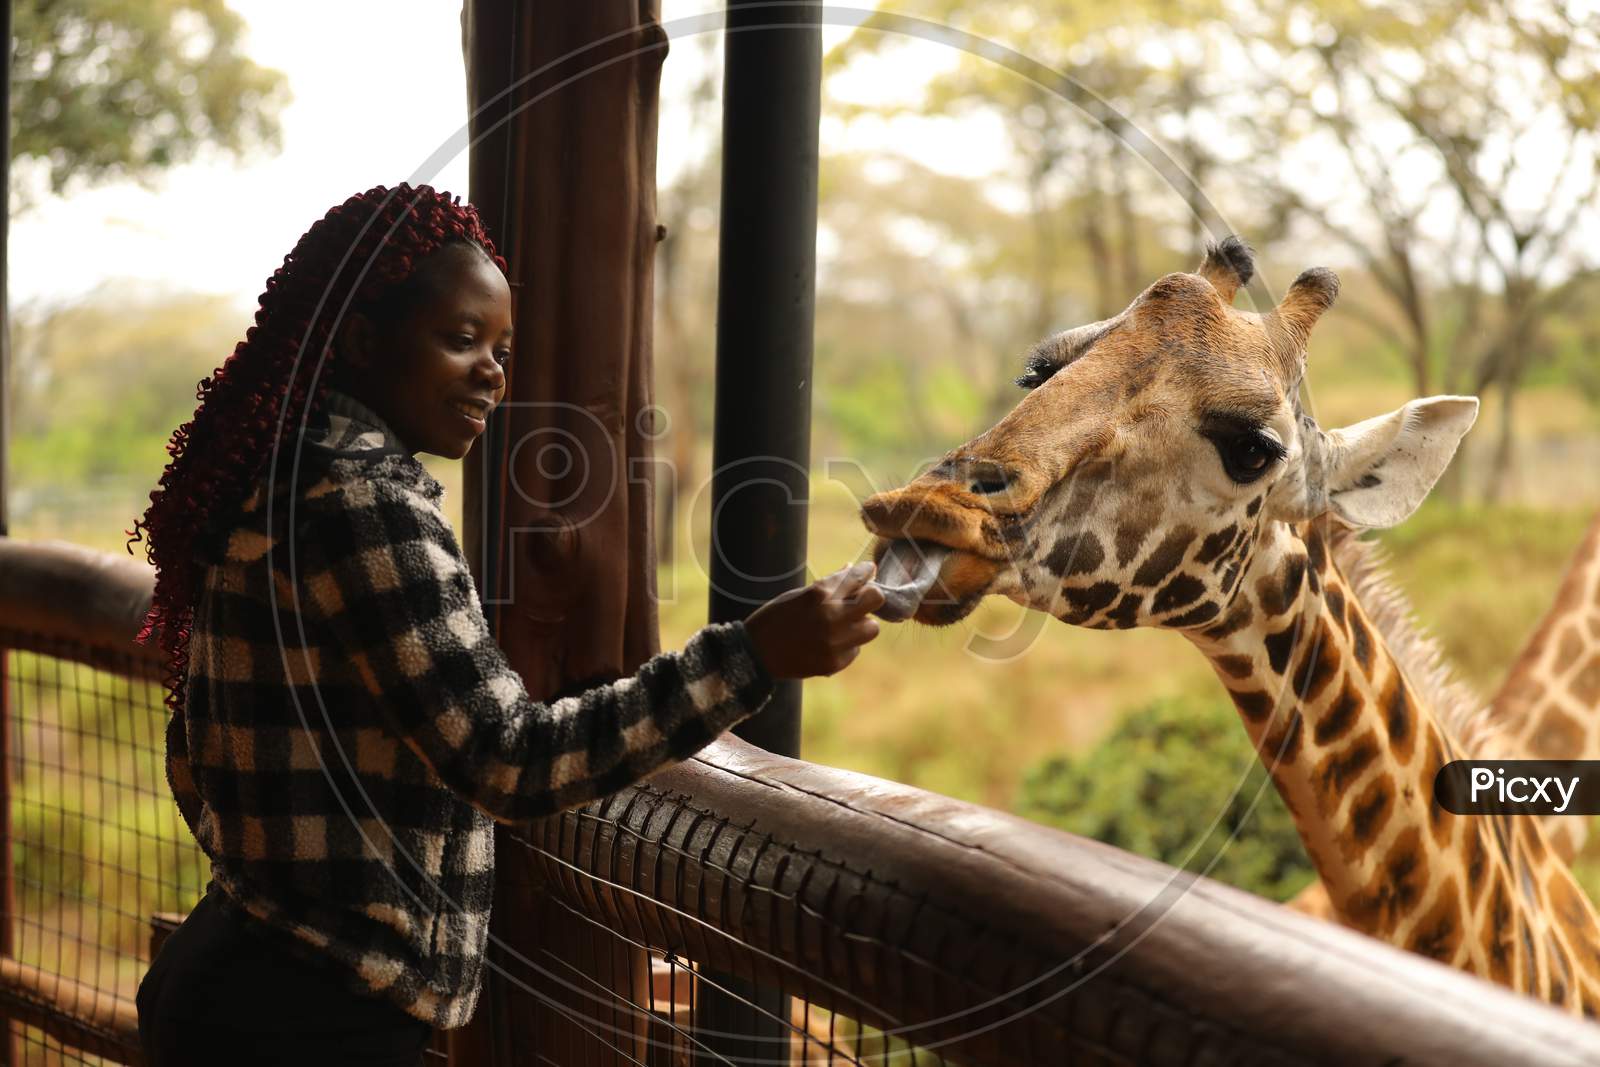 A  Giraffe  eating from the hand of a woman